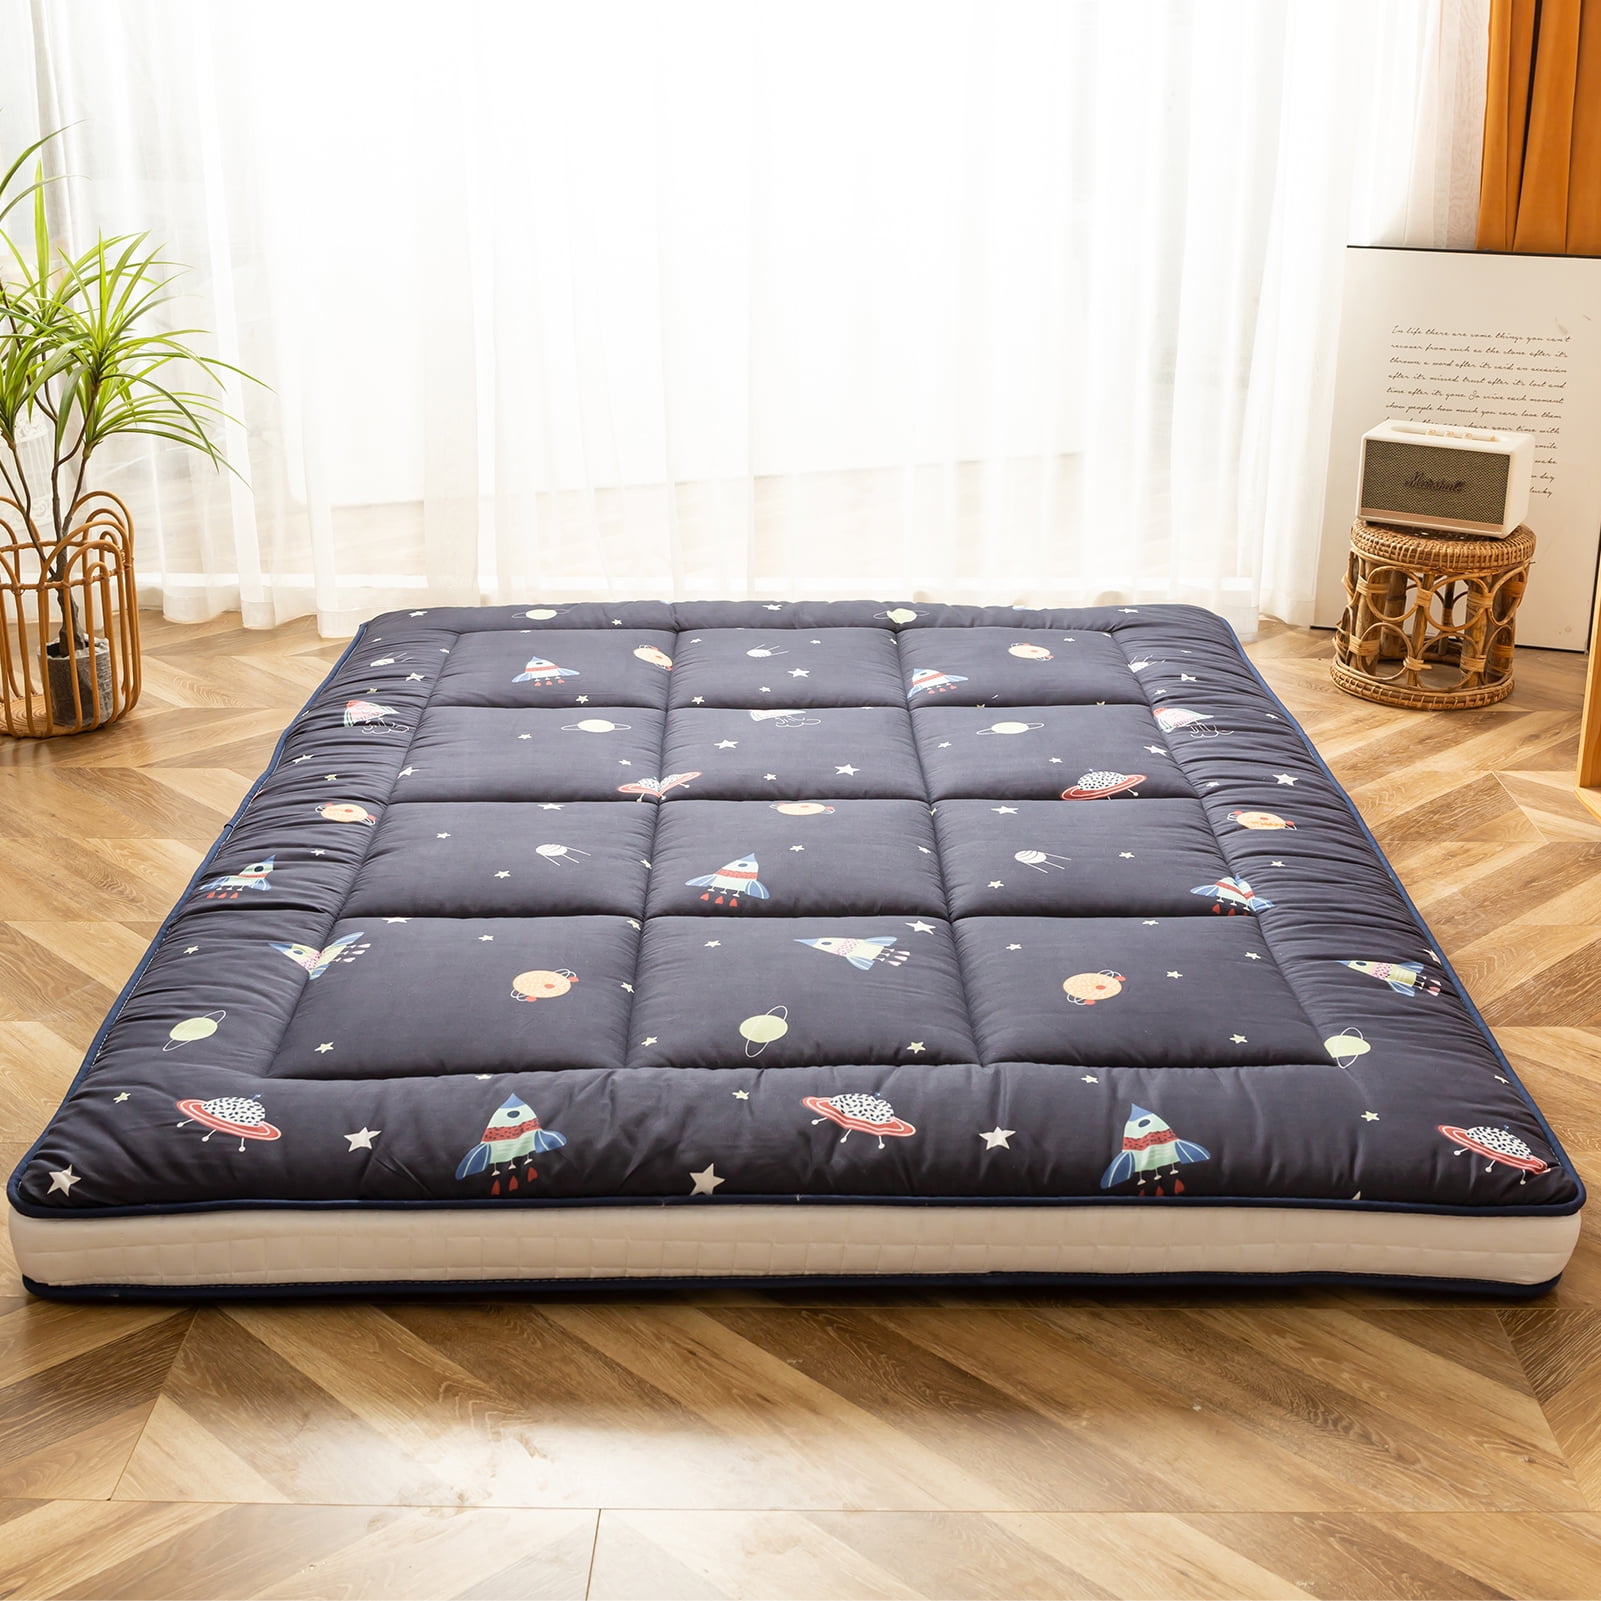 Leinuosen Japanese Floor Mattress Cow Print Futon Mattress Twin Thicken  Tatami Mat Couch Sleeping Pad Foldable Roll up Bed Mattress with Portable